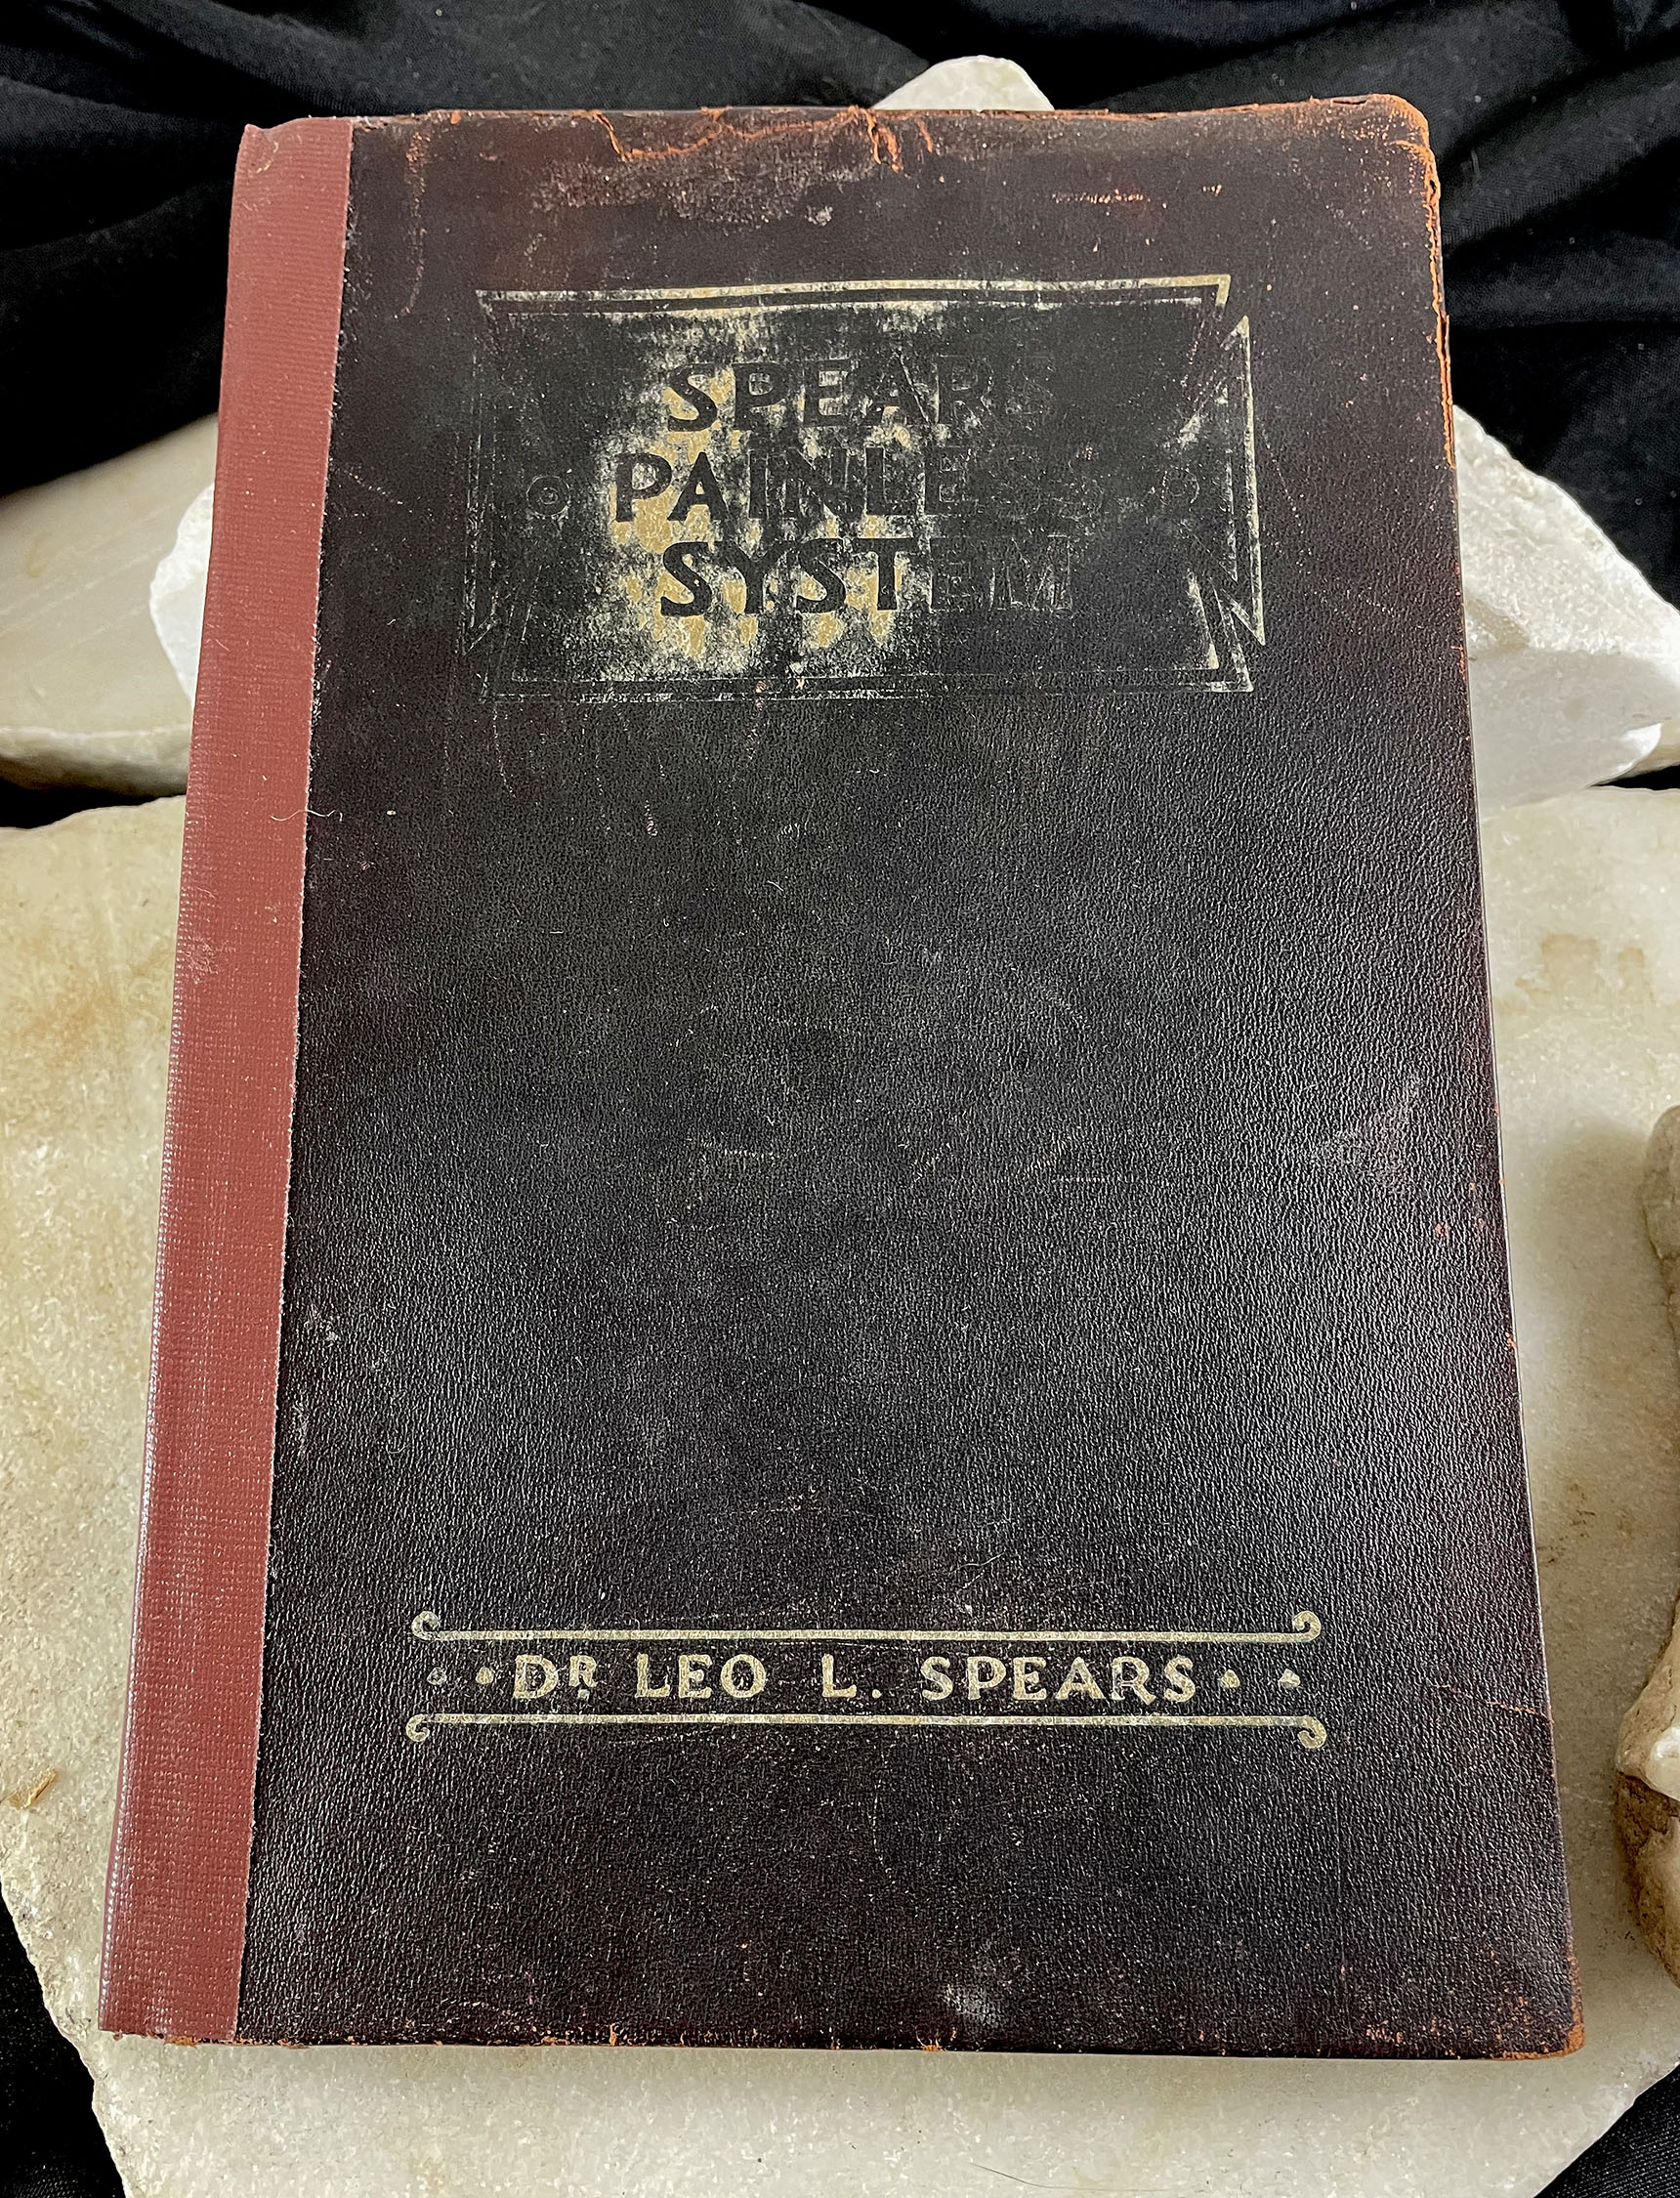 Spears Painless System chiropractic Dr. Leo Spears signed first edition 1925